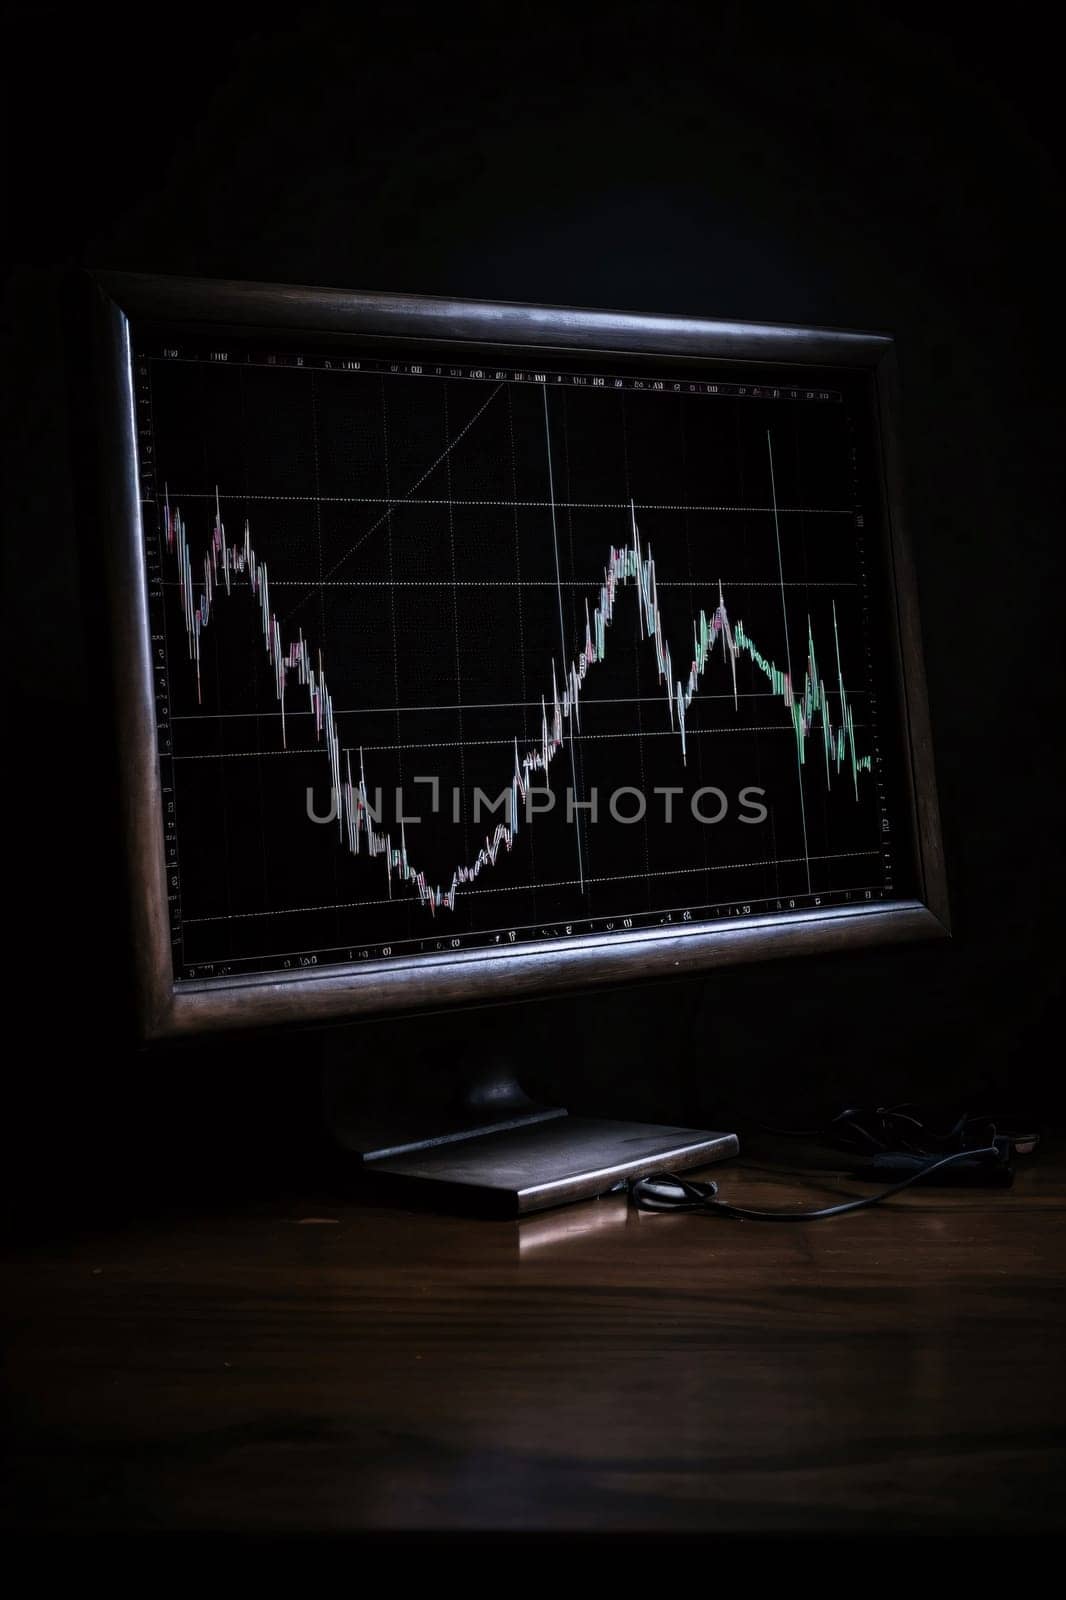 Stock Market: Monitor with stock market graph on screen. Stock market or forex trading graph on computer screen. Business and financial concept. Selective focus.